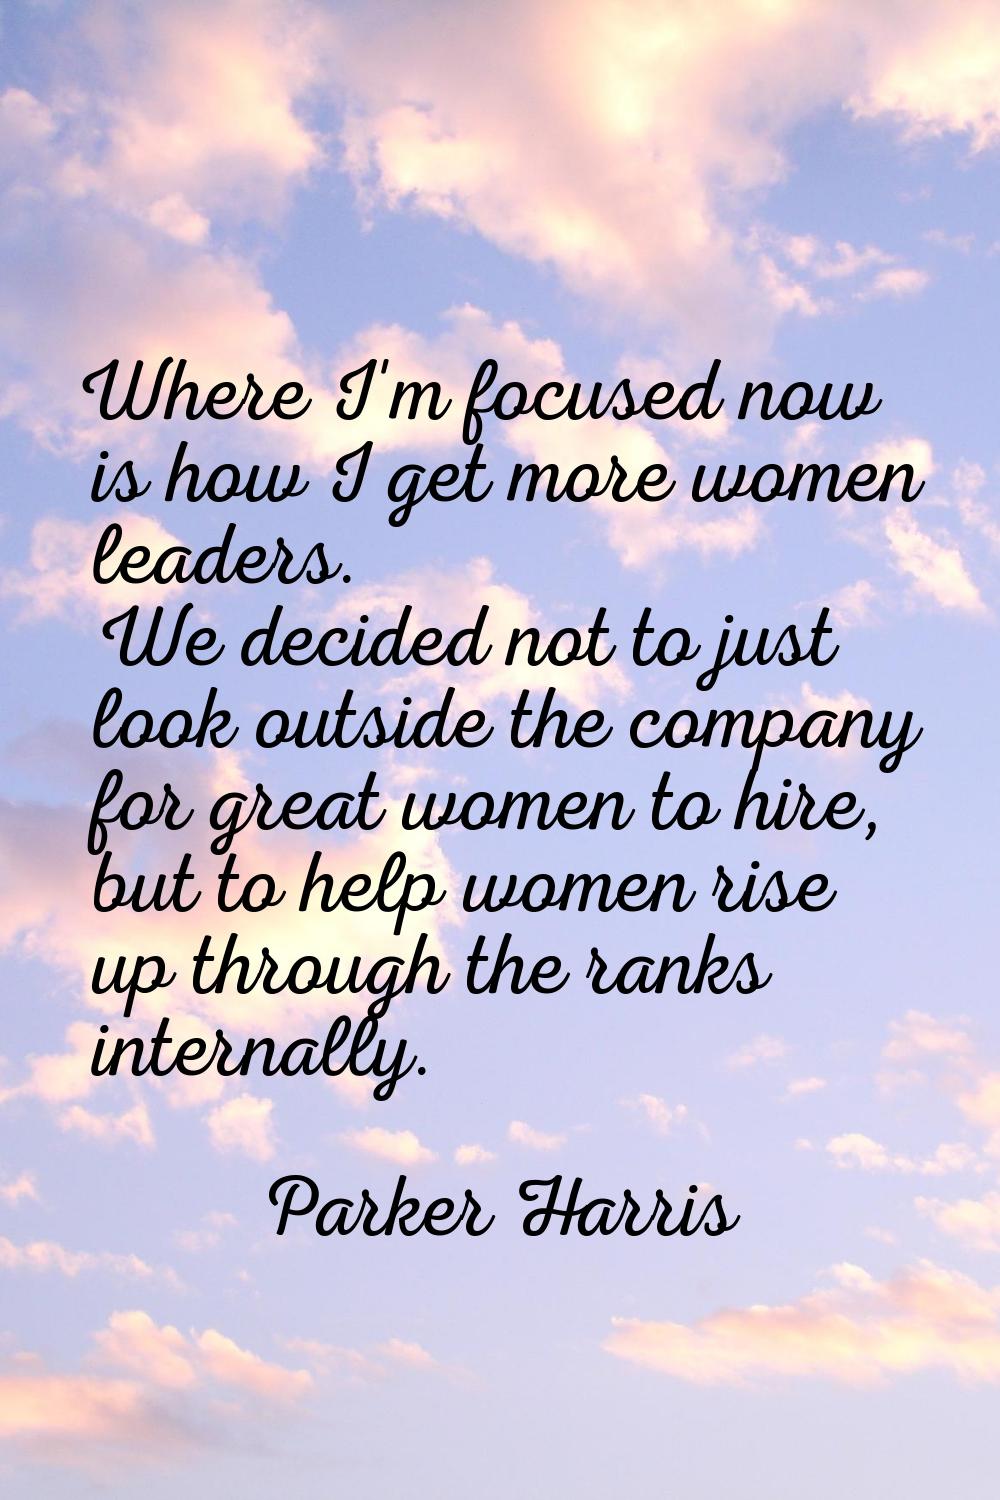 Where I'm focused now is how I get more women leaders. We decided not to just look outside the comp